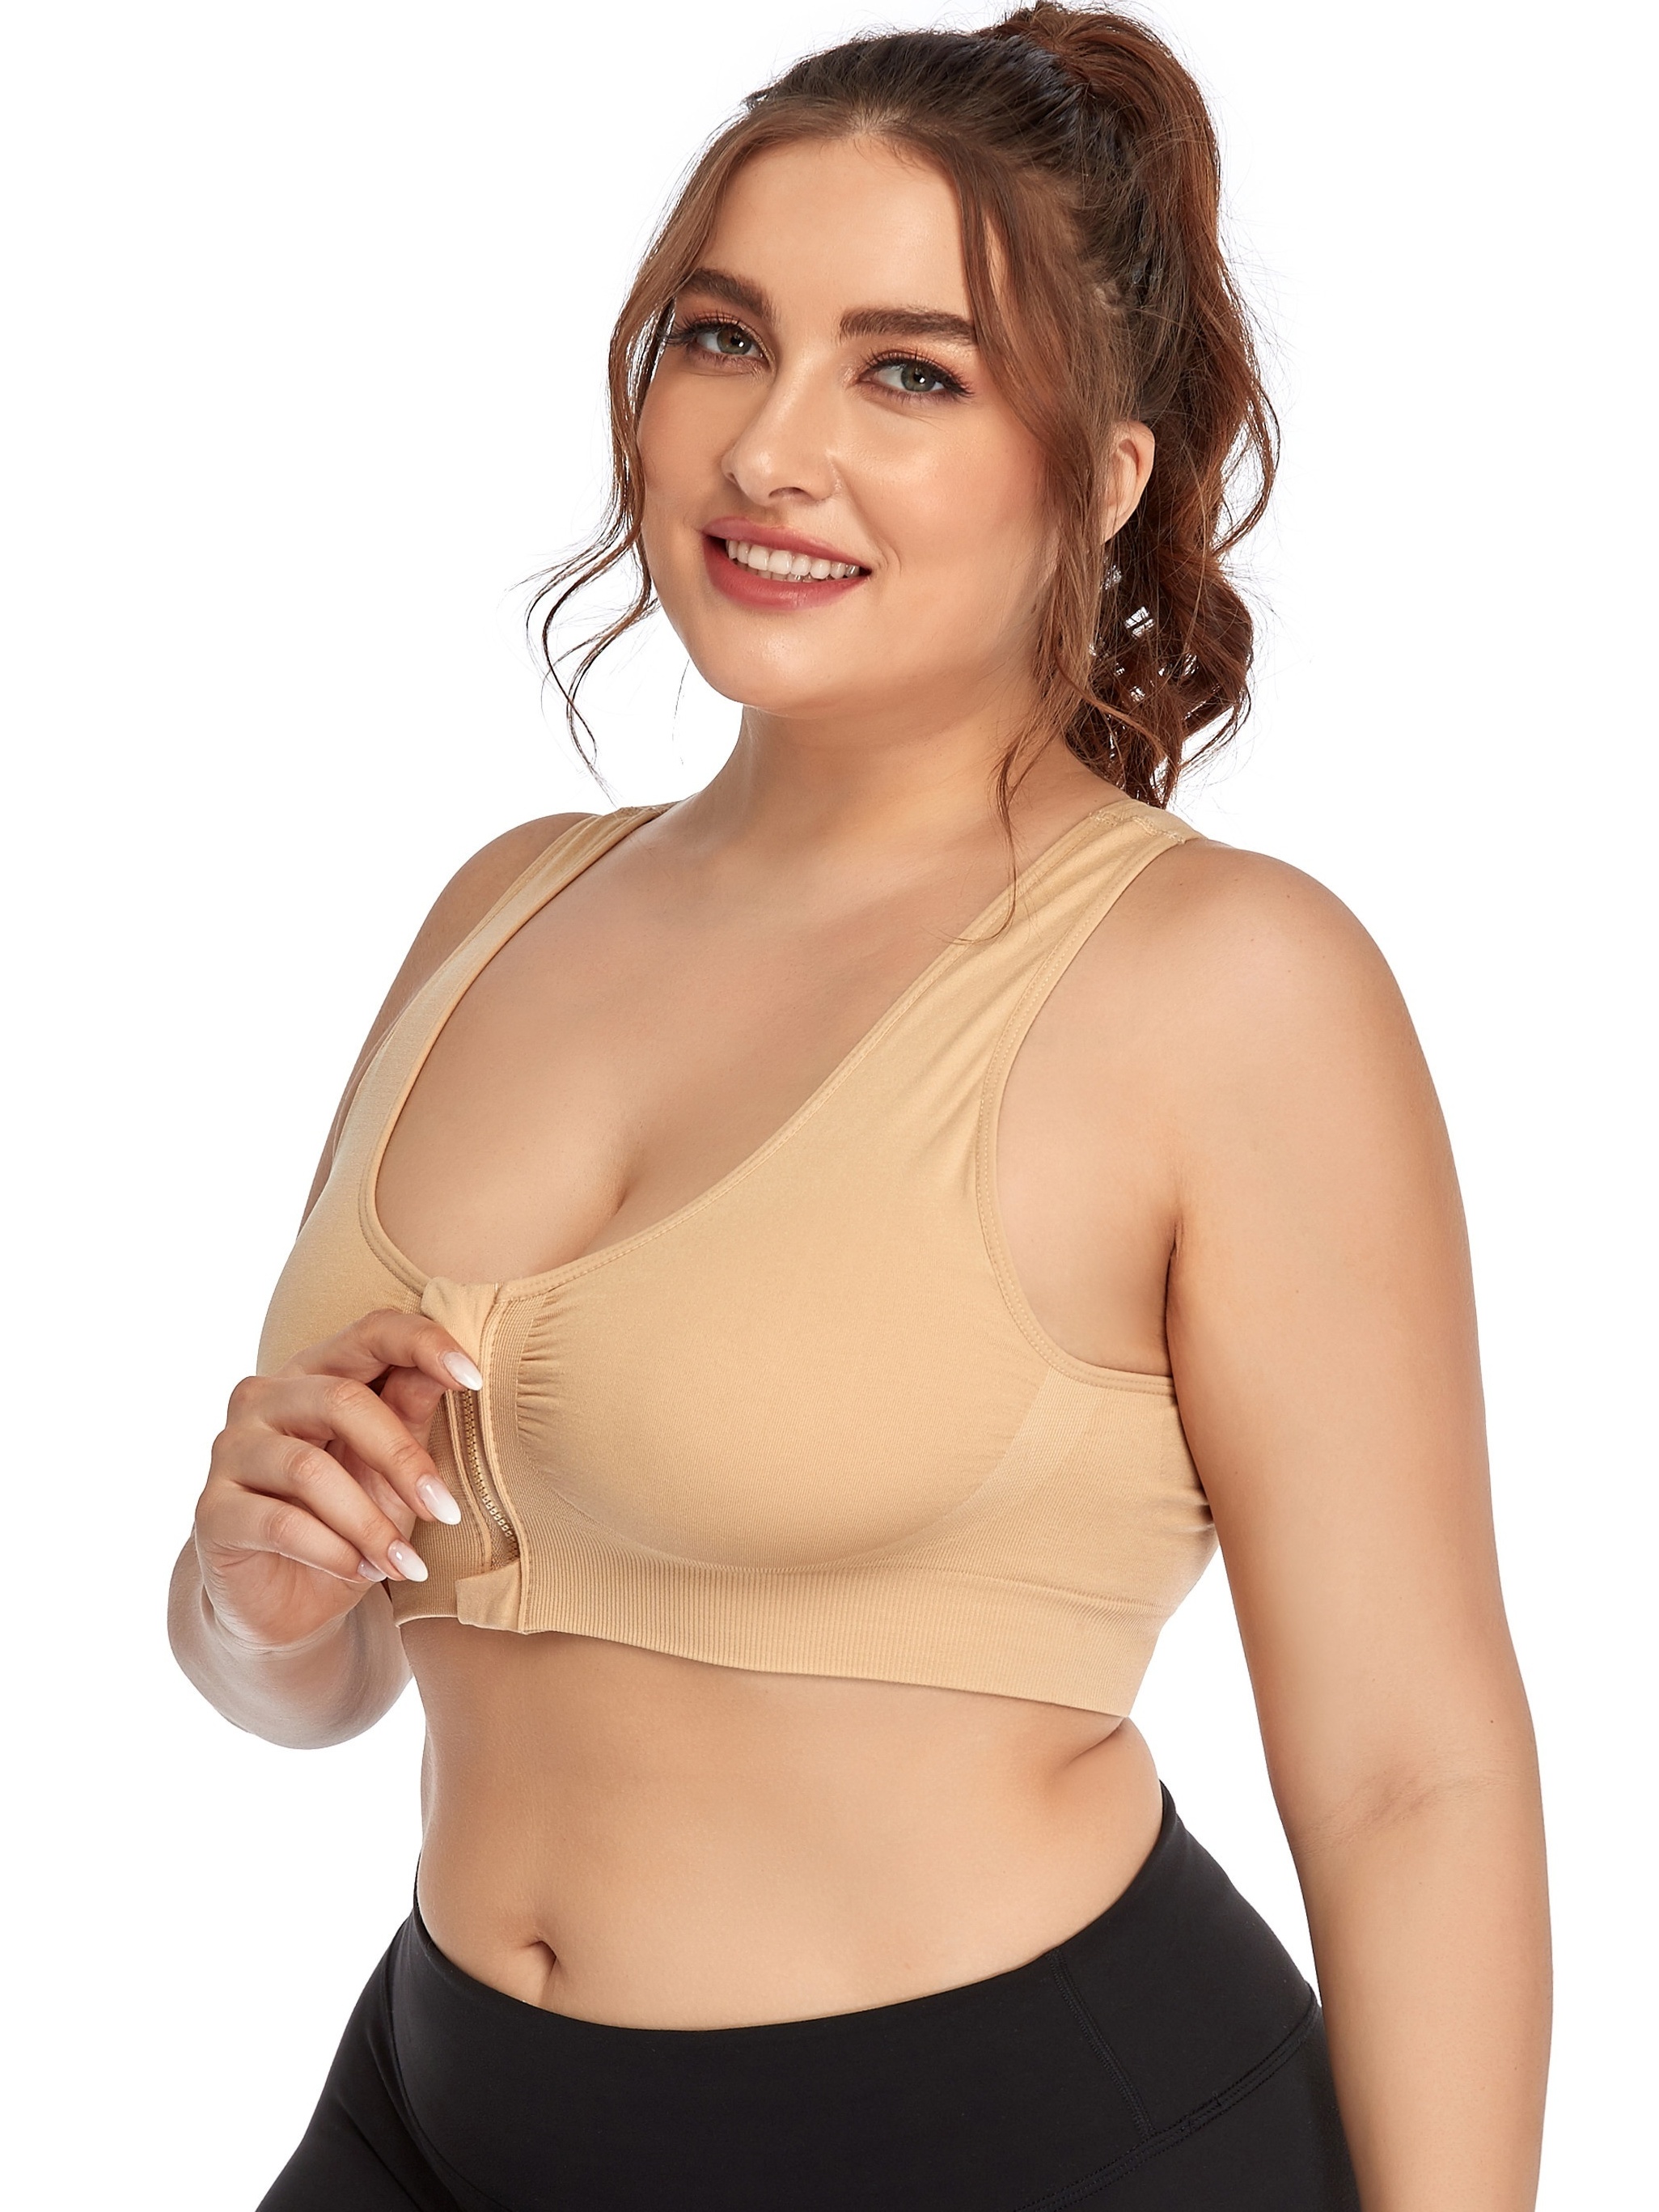 Plus Size Sports Bra for Women - Easy Access Lingerie Nude Strapless Dance  Bra Lace Sports Bra Sets Sport Bra Removable Pad Gym Top Women Crop Support